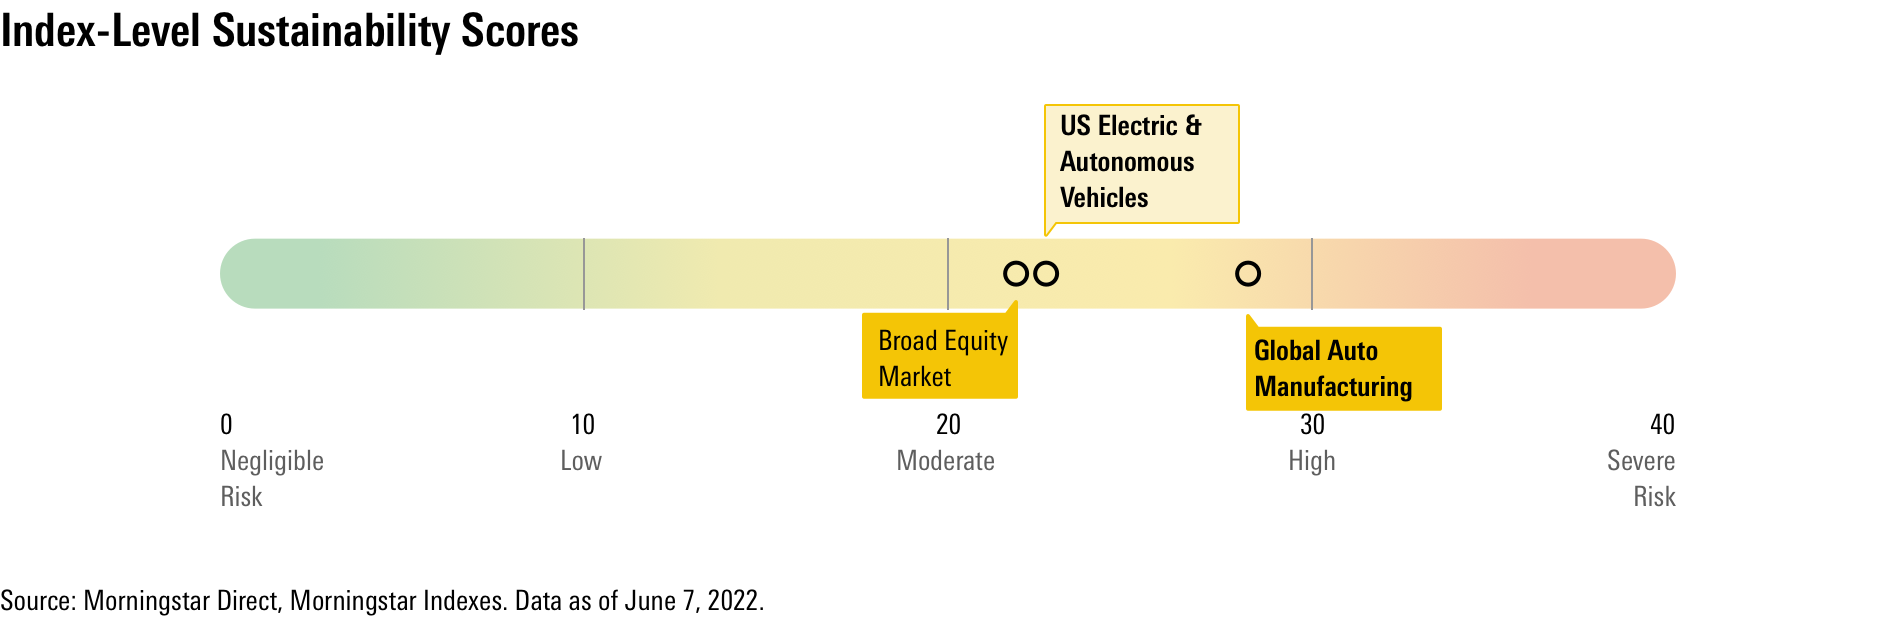 Portfolio-level sustainability score of the US Electric & Autonomous Vehicles Index vs the Morningstar US Market and Morningstar Global Auto Manufacturing indexes